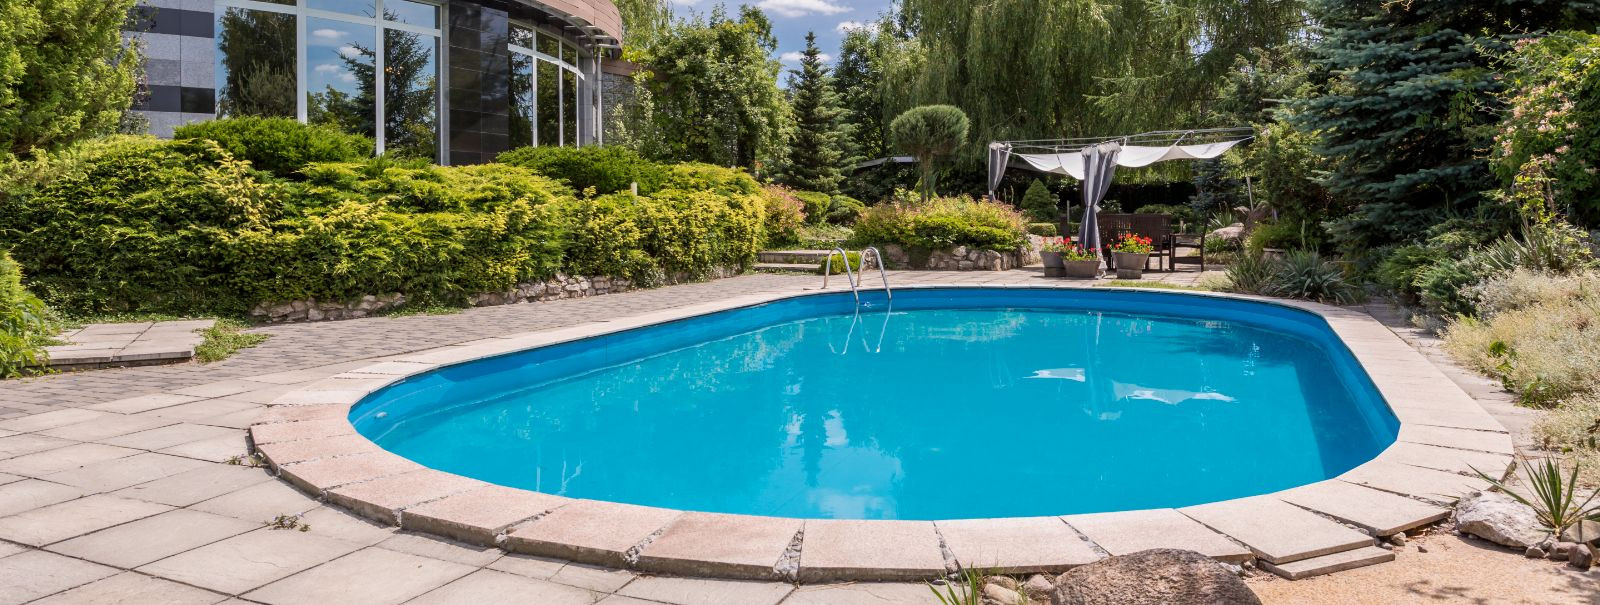 As a homeowner, your pool is a centerpiece for relaxation and family fun. However, over time, even the most well-maintained pools can show signs of aging and ma